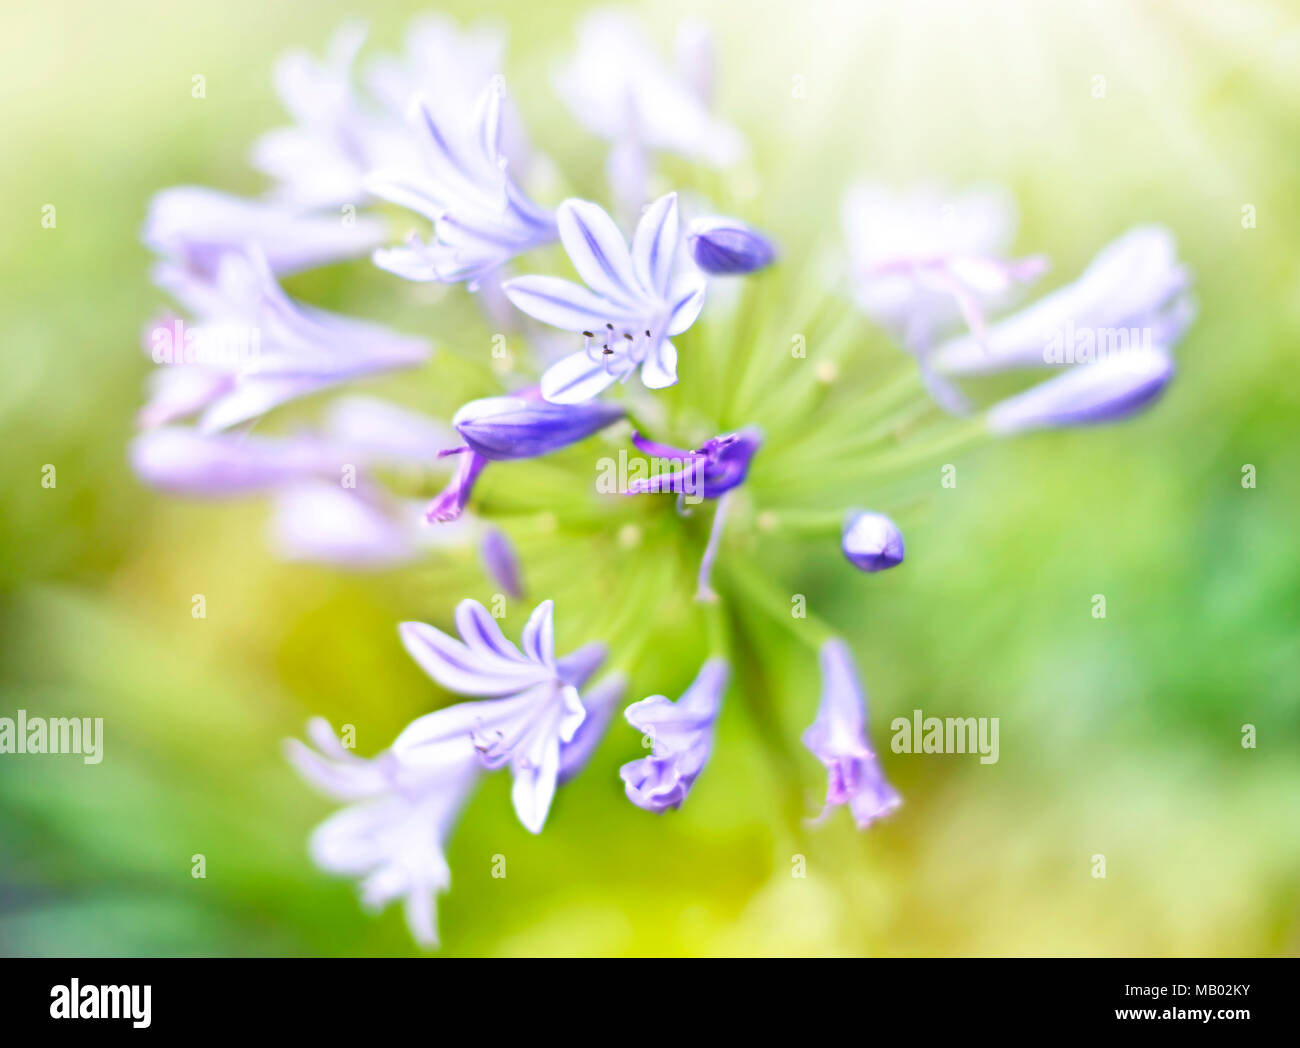 Bluebell flowers in the sun with selective focus and smooth sunlight. Closeup shot of blue bell flowers. Purple spring flowers background. Stock Photo